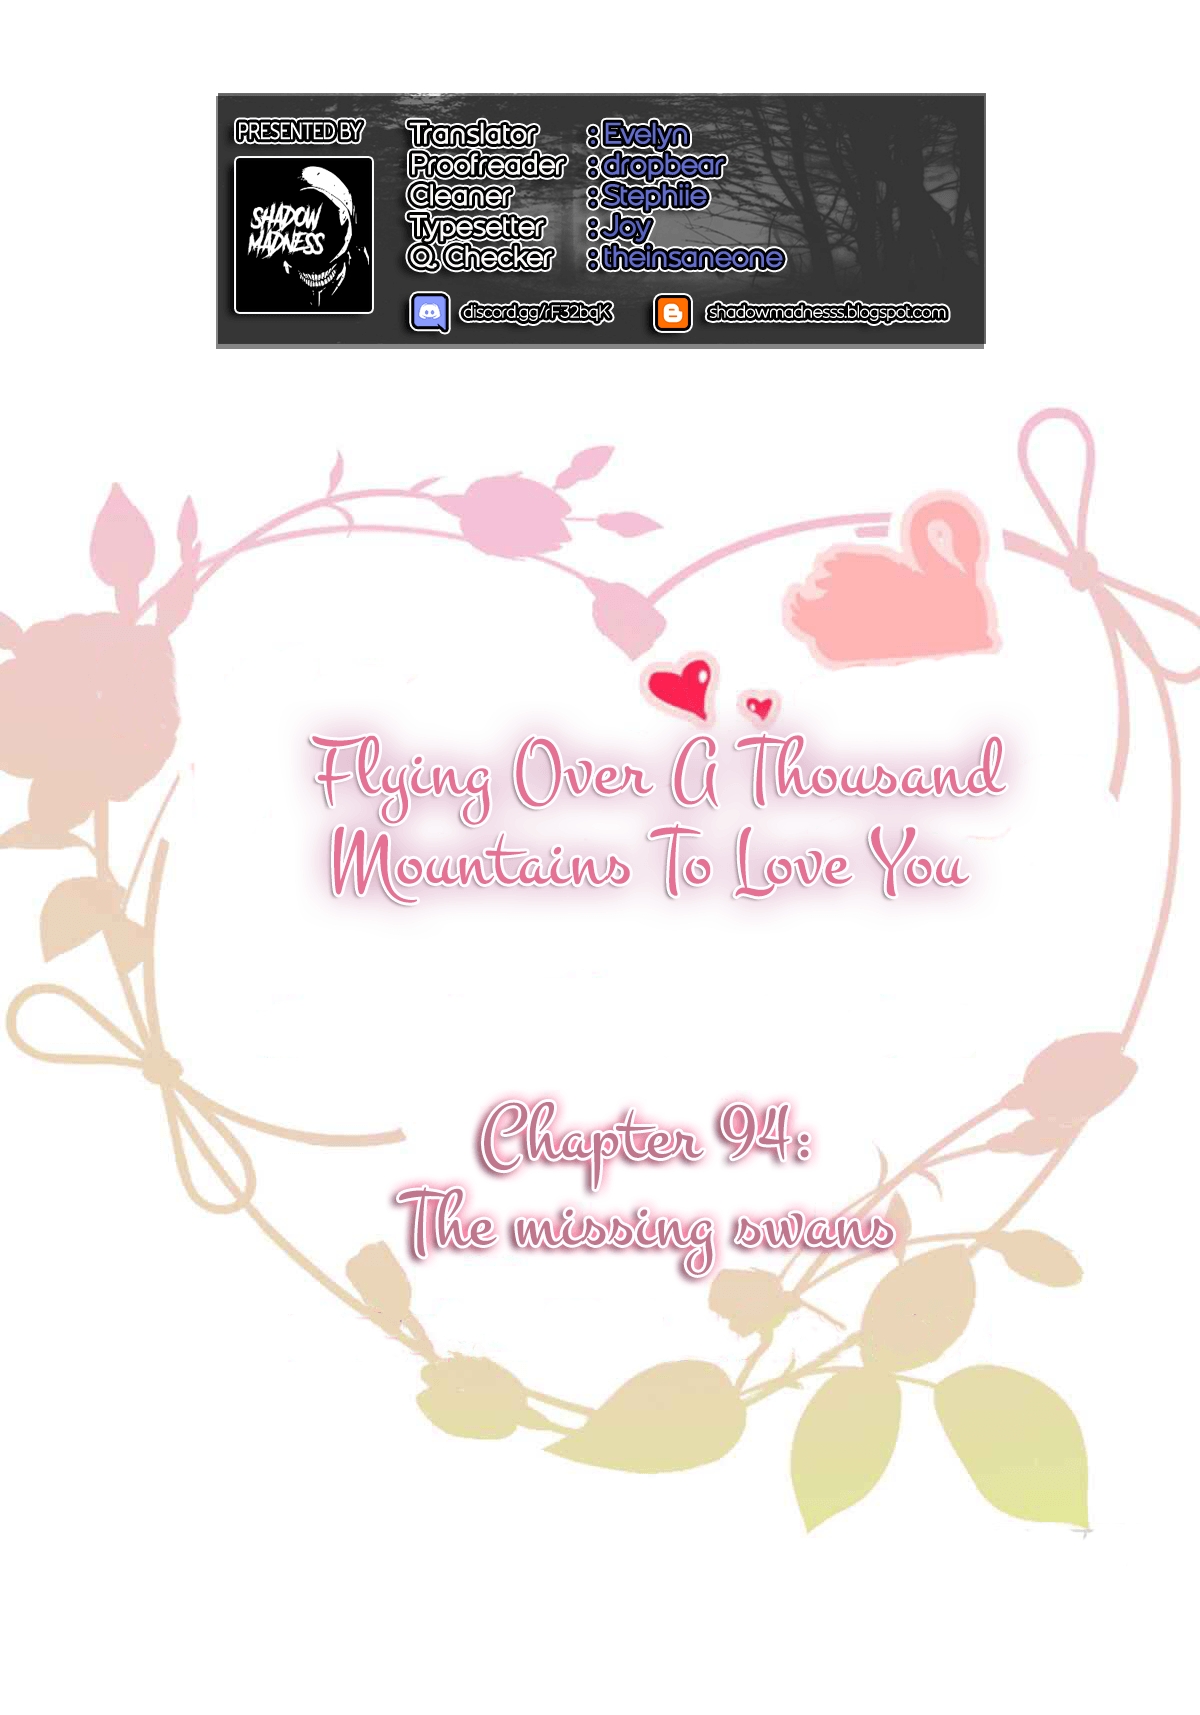 Flying Over a Thousand Mountains to Love You Ch. 94 The missing swans